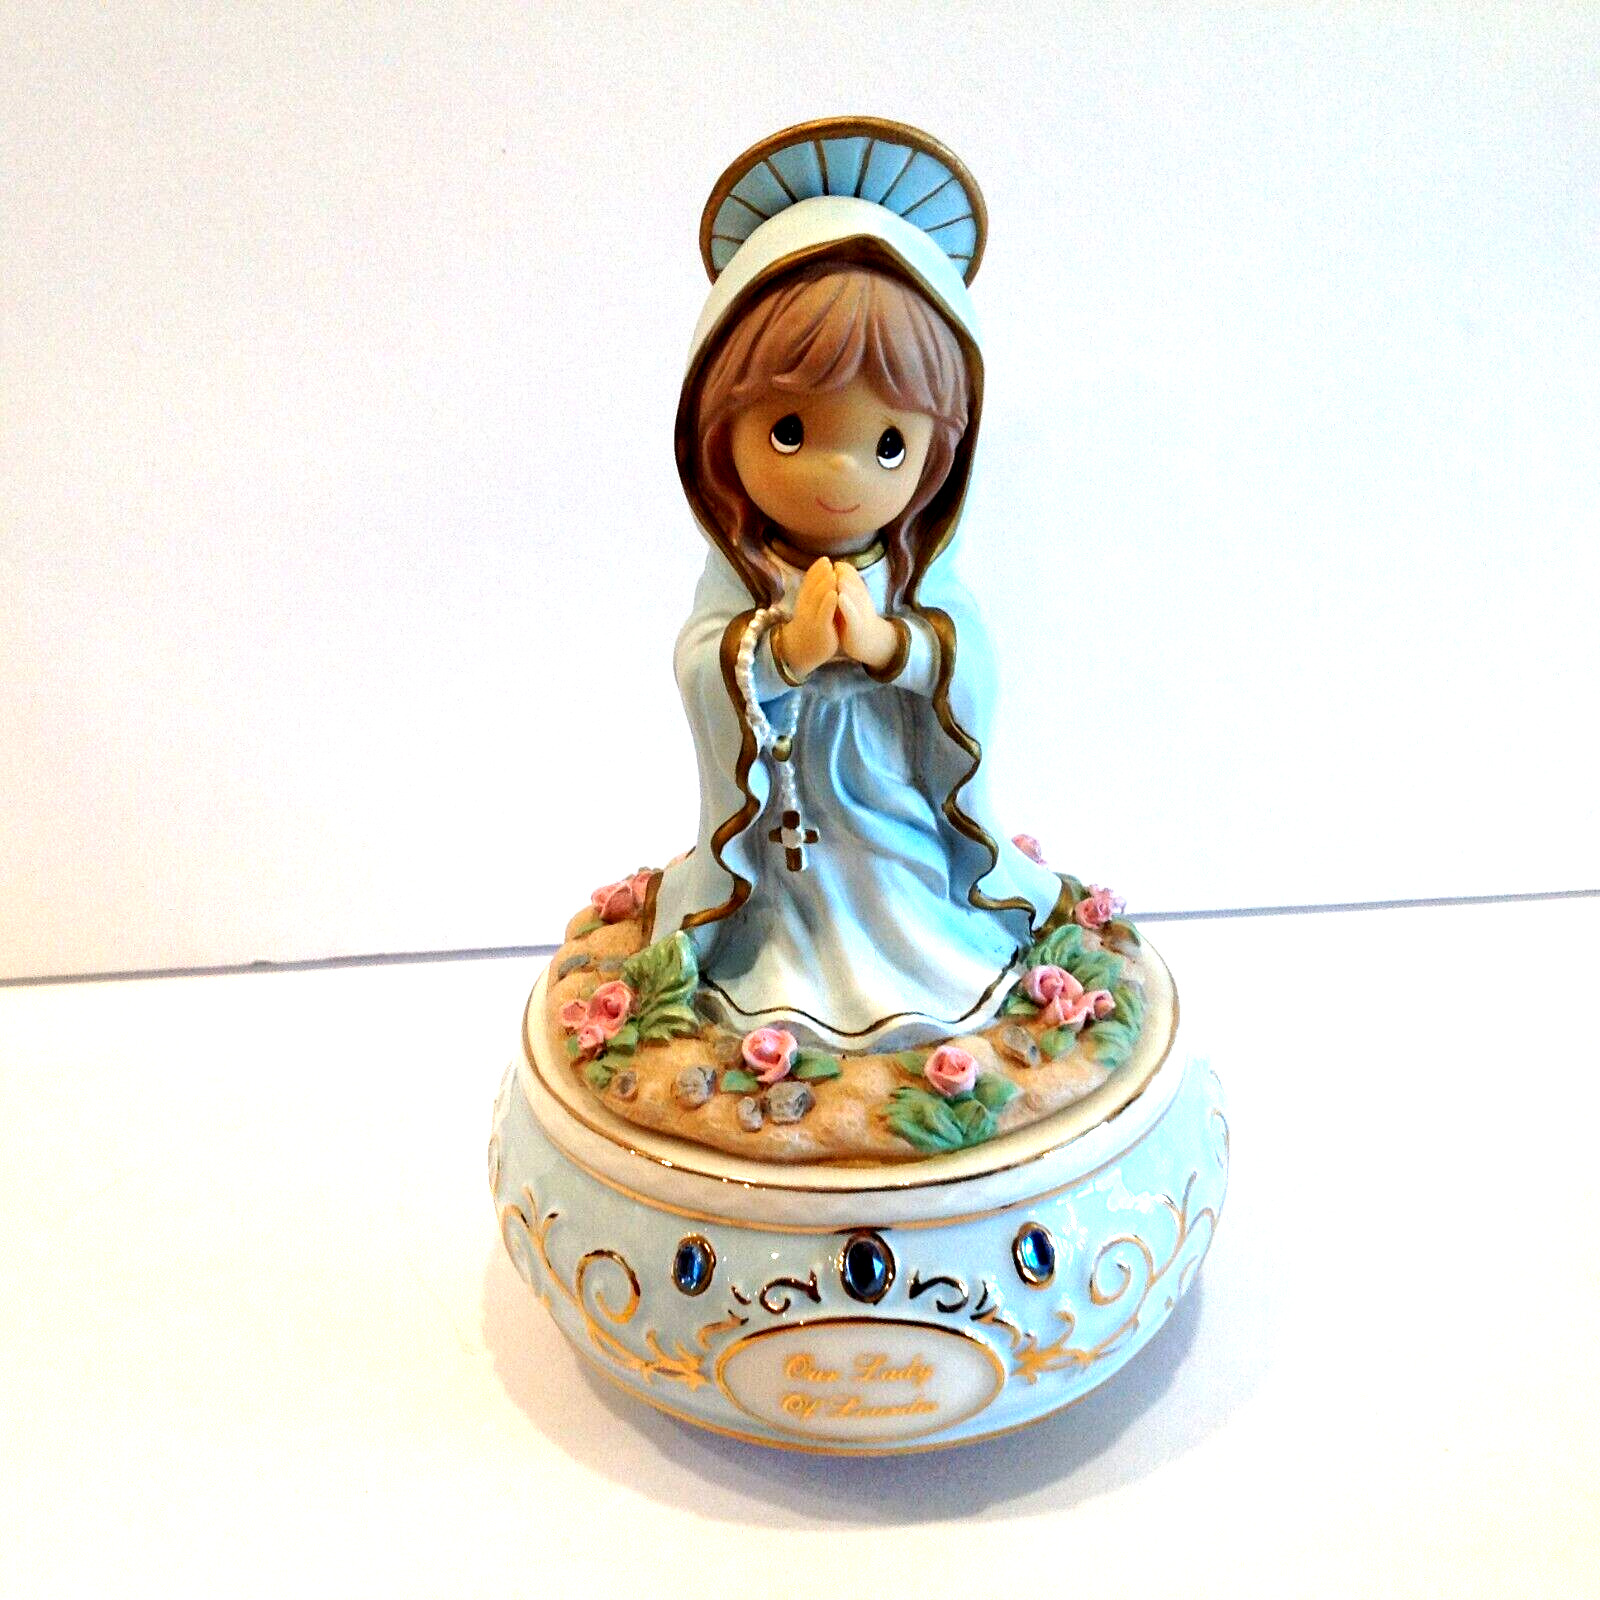 Precious Moments Musical Our Lady of Lourdes Figurine- Plays Ave Maria